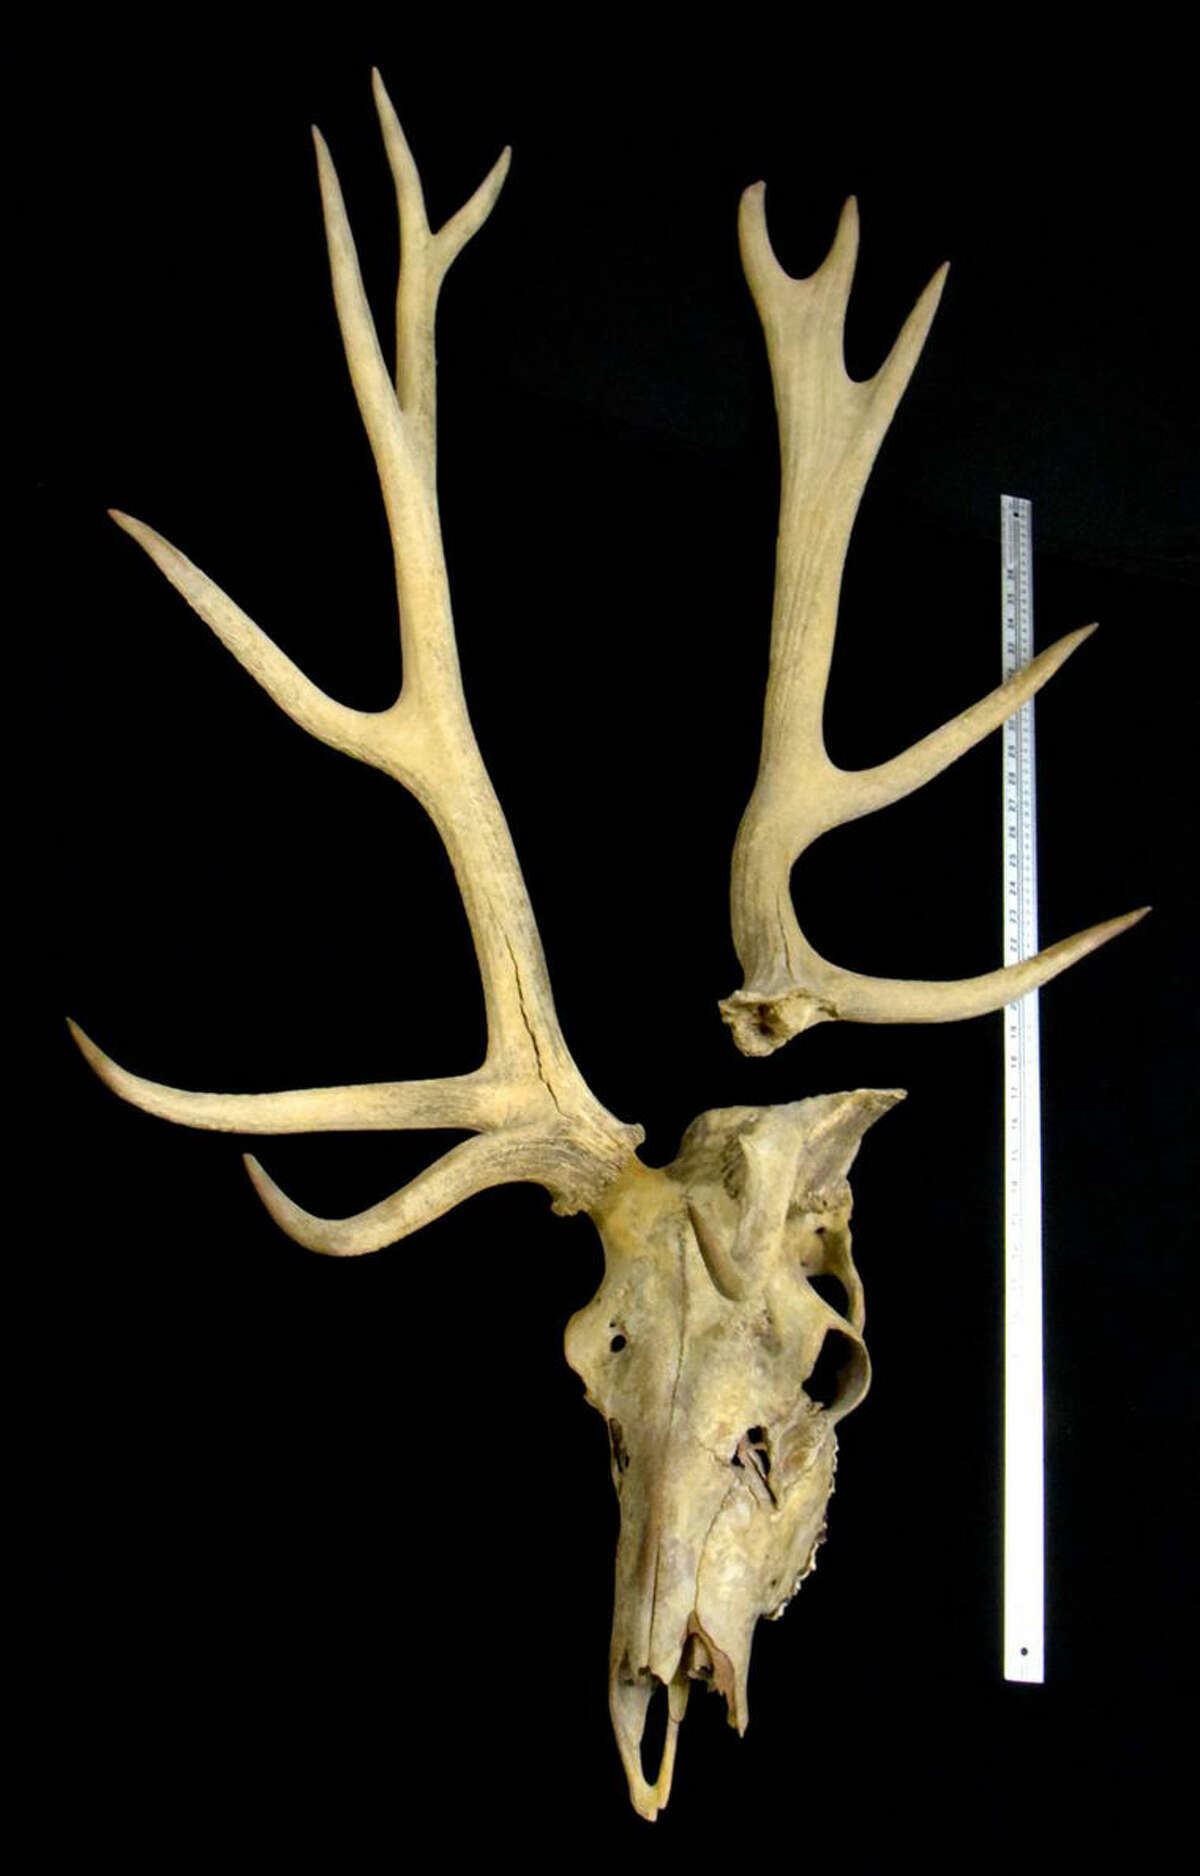 FILE- This undated photo provided by Michigan State University shows an ancient elk's skull and antlers. The skull and antlers turned up at Michigan State University, more than 30 years after they were discovered but then stolen from the ground in Shiawassee County, Mich. A museum at Michigan State University will be the permanent home of antlers and skull they are believed to be more than 5,000 years old. (Pearl Yee Wong/Michigan State University Museum via AP, File)